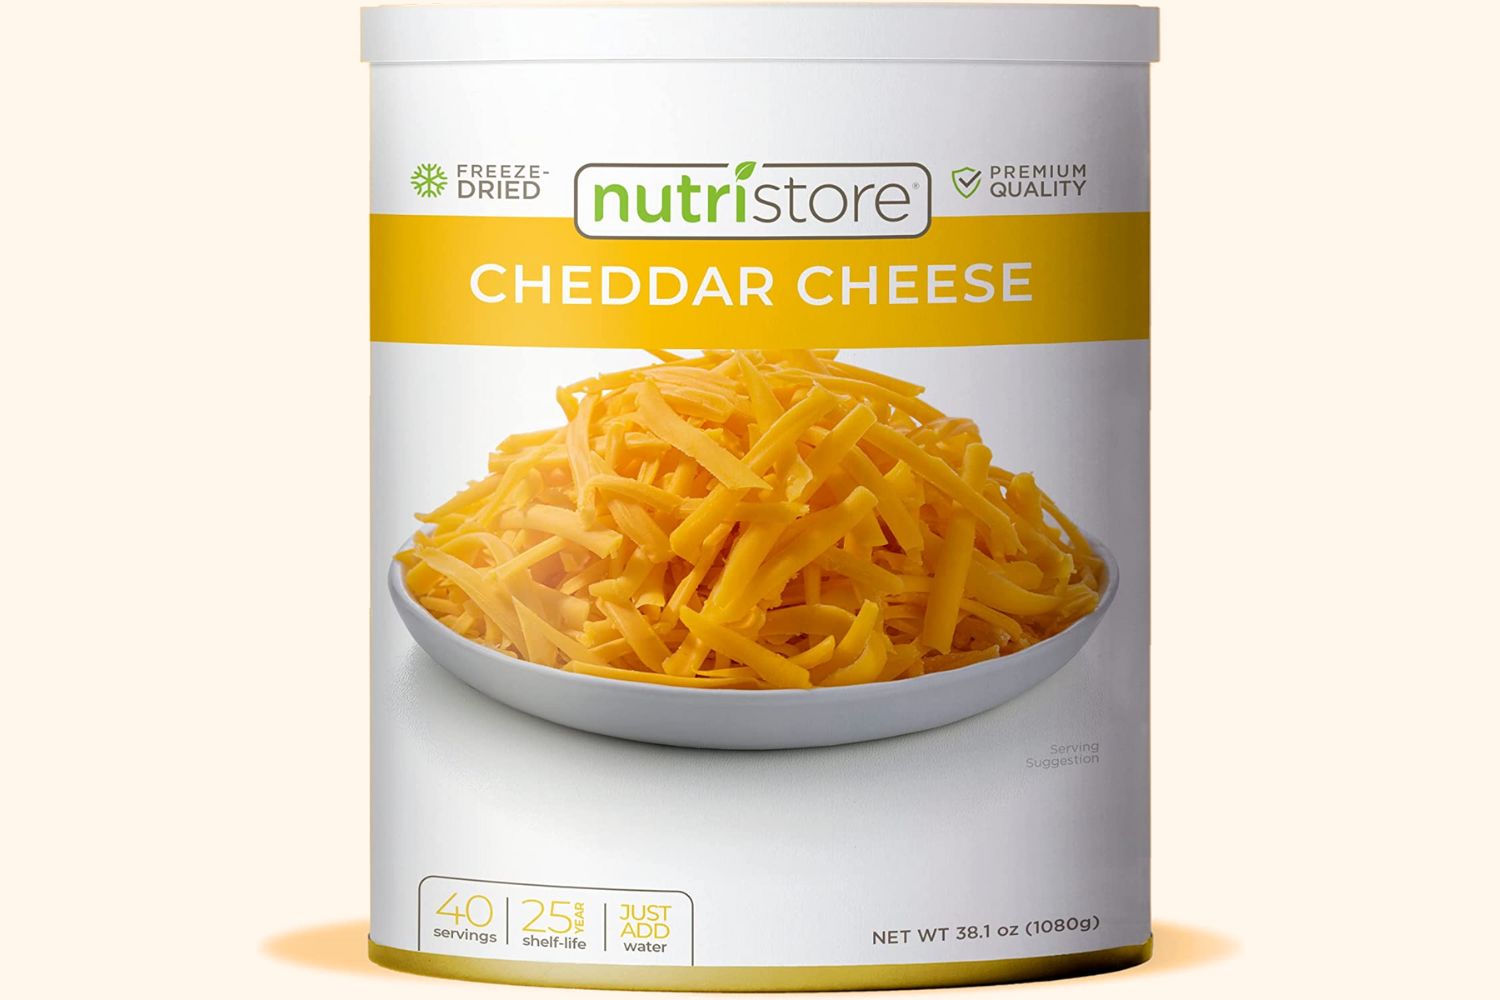 Our choice: Nutristore Freeze-Dried Cheddar Cheese Shredded